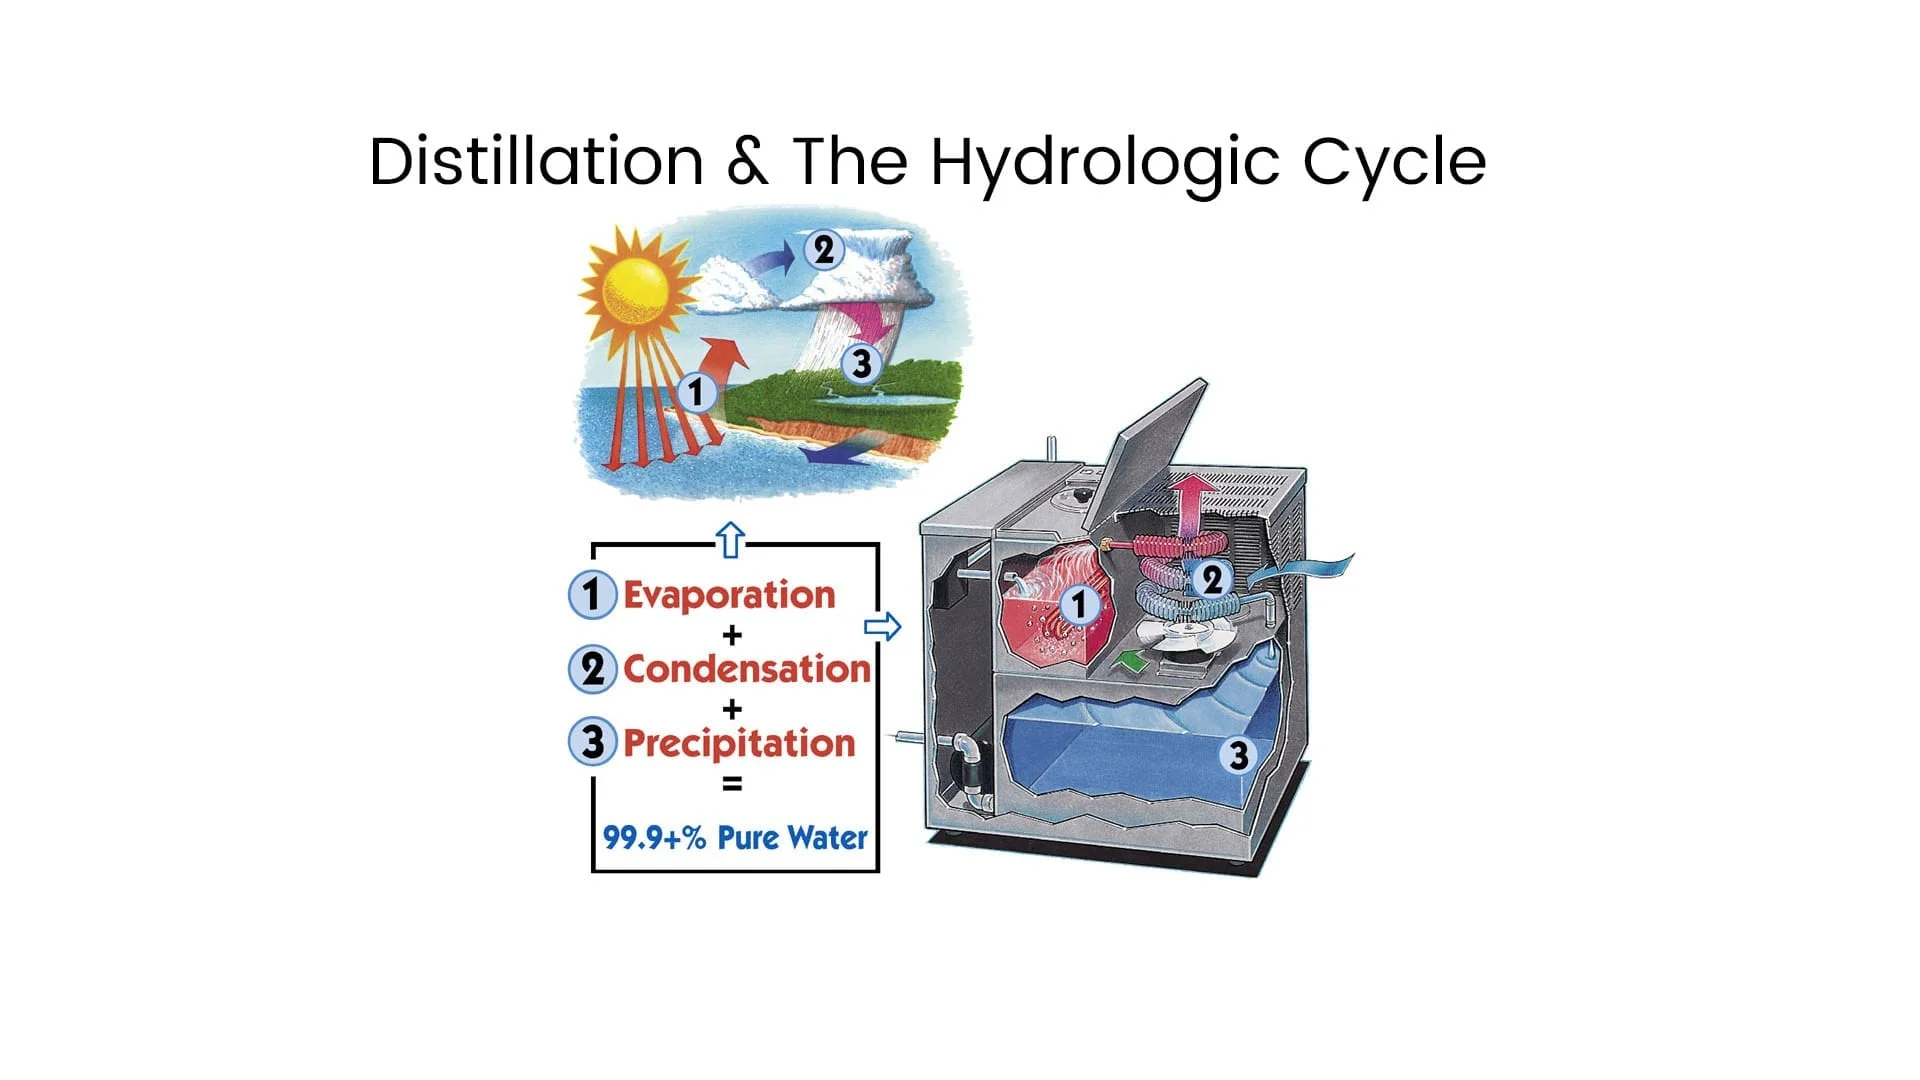 Distillation and the Hydrologic Cycle